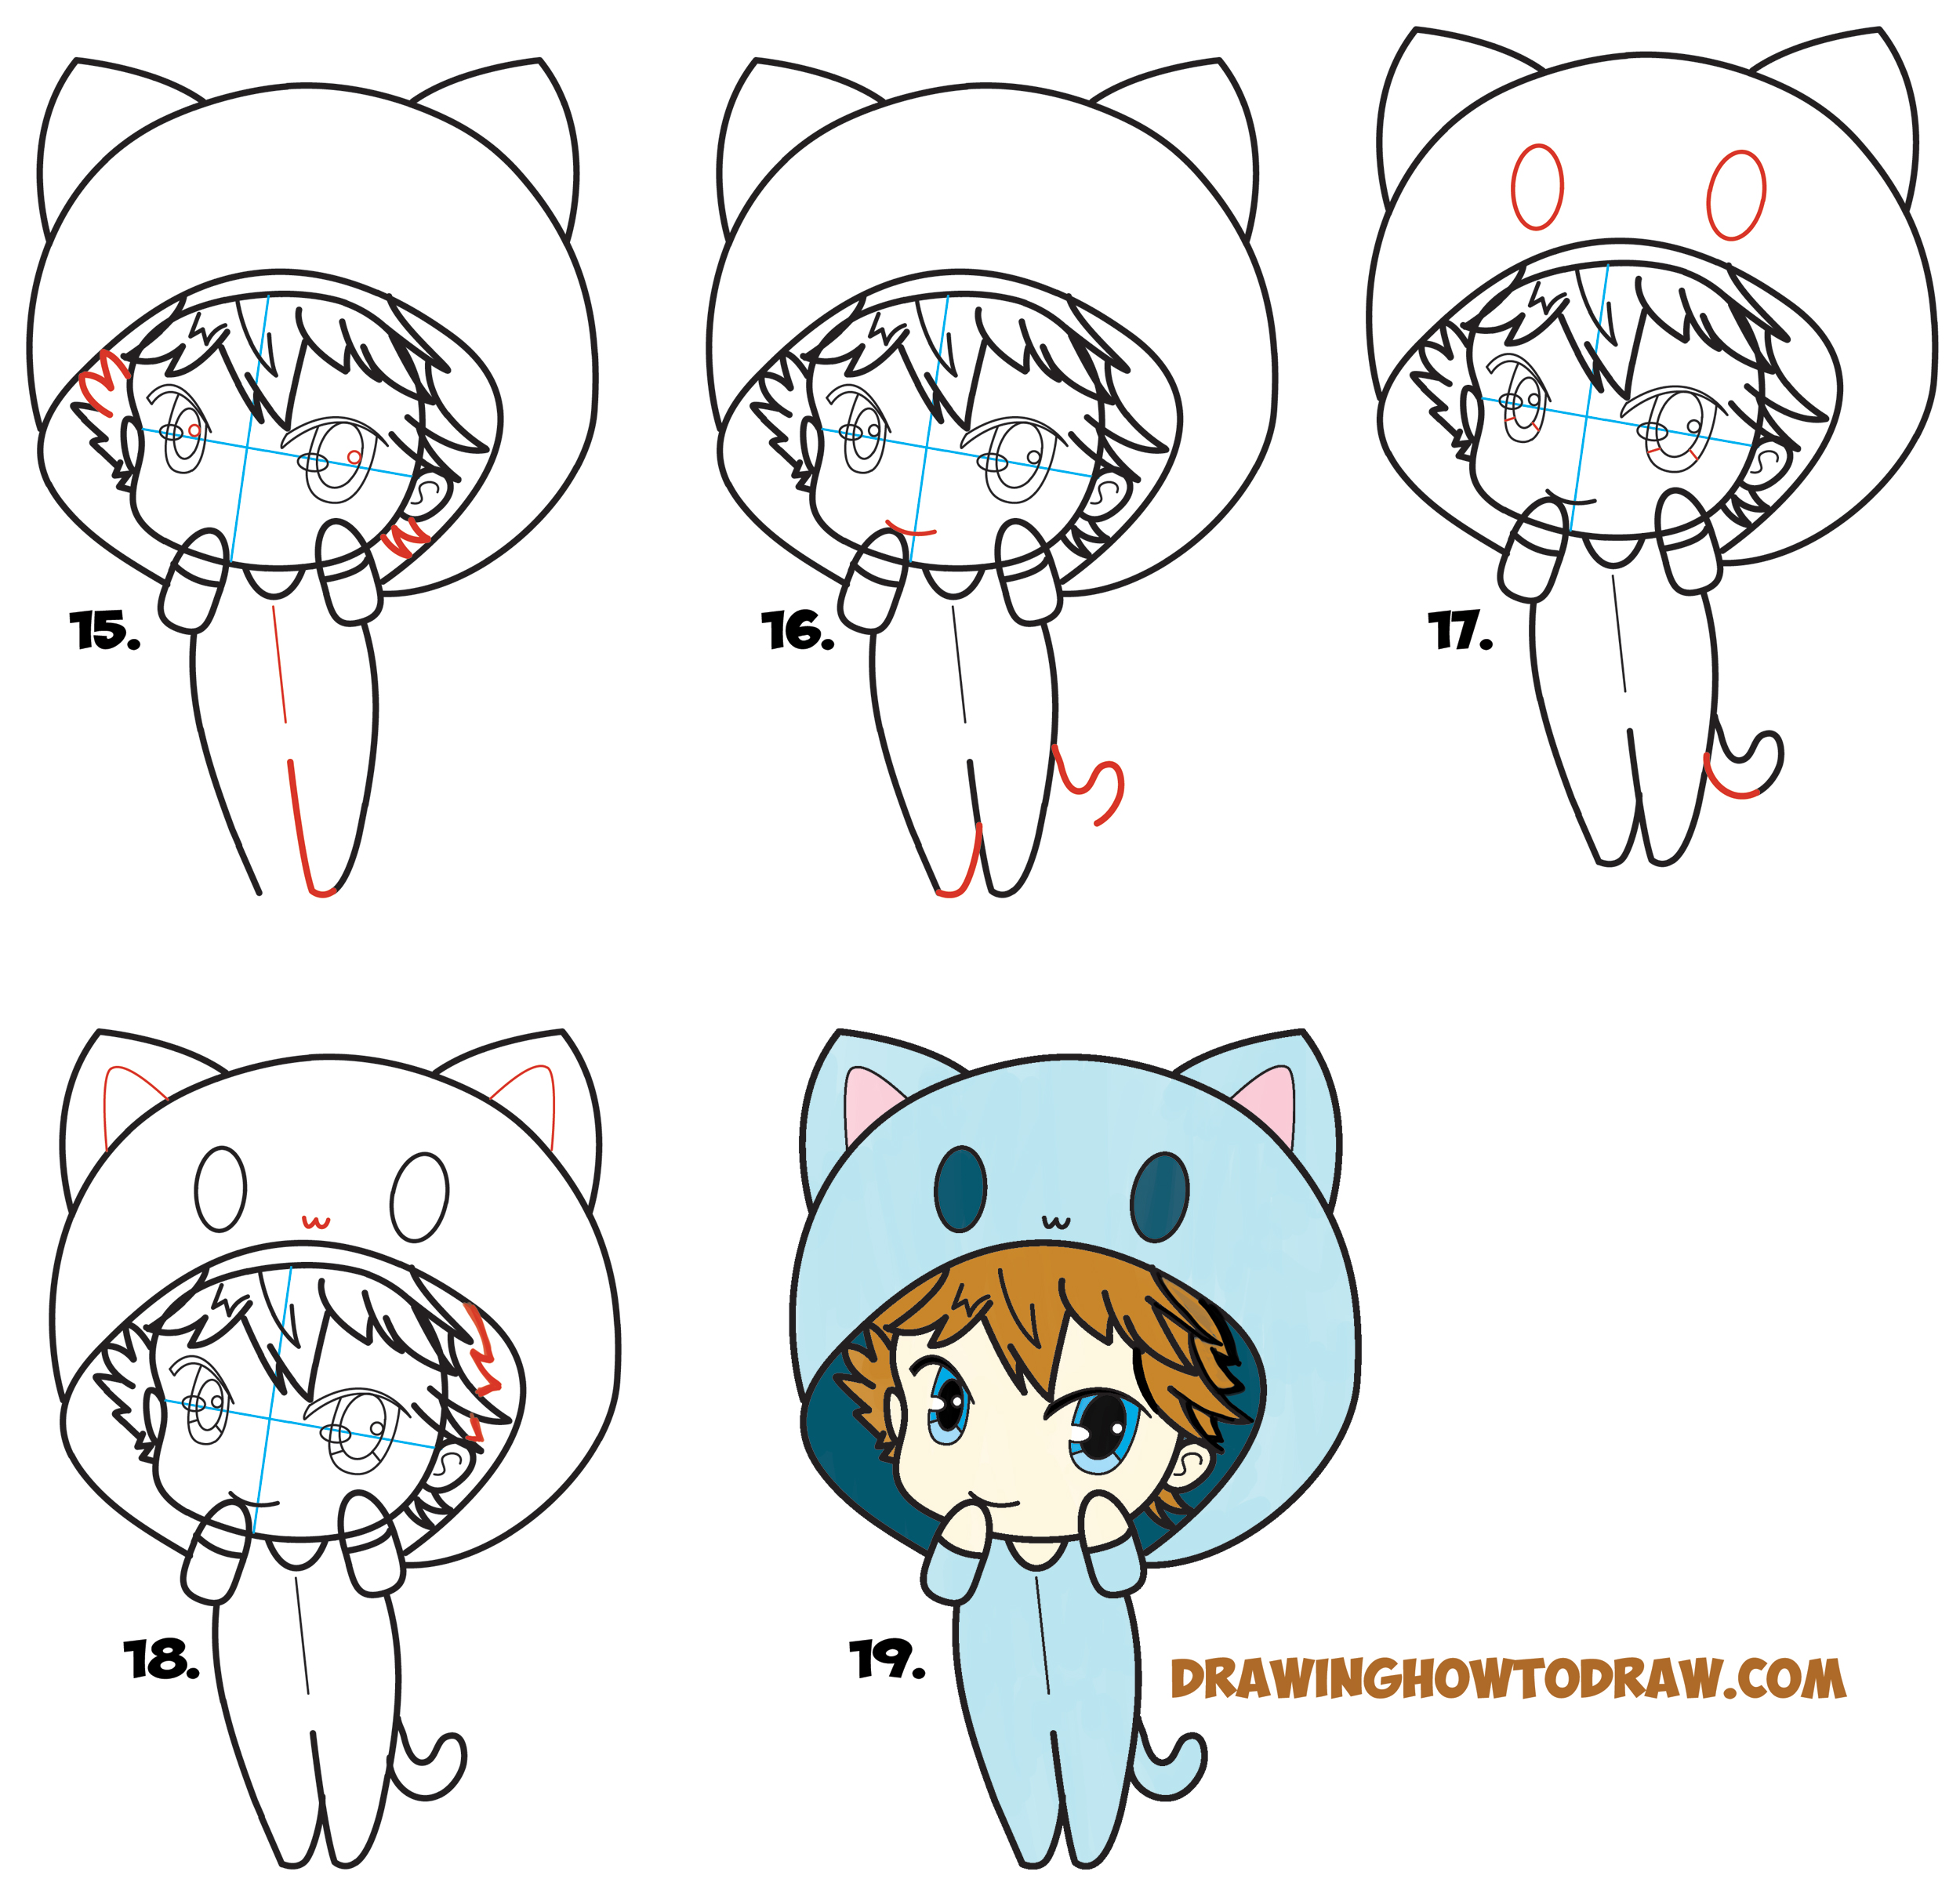 Learn How to Draw a Chibi Boy with Hood On - Drawing Cute Chibi Boys - Simple Steps Drawing Lesson for Beginners